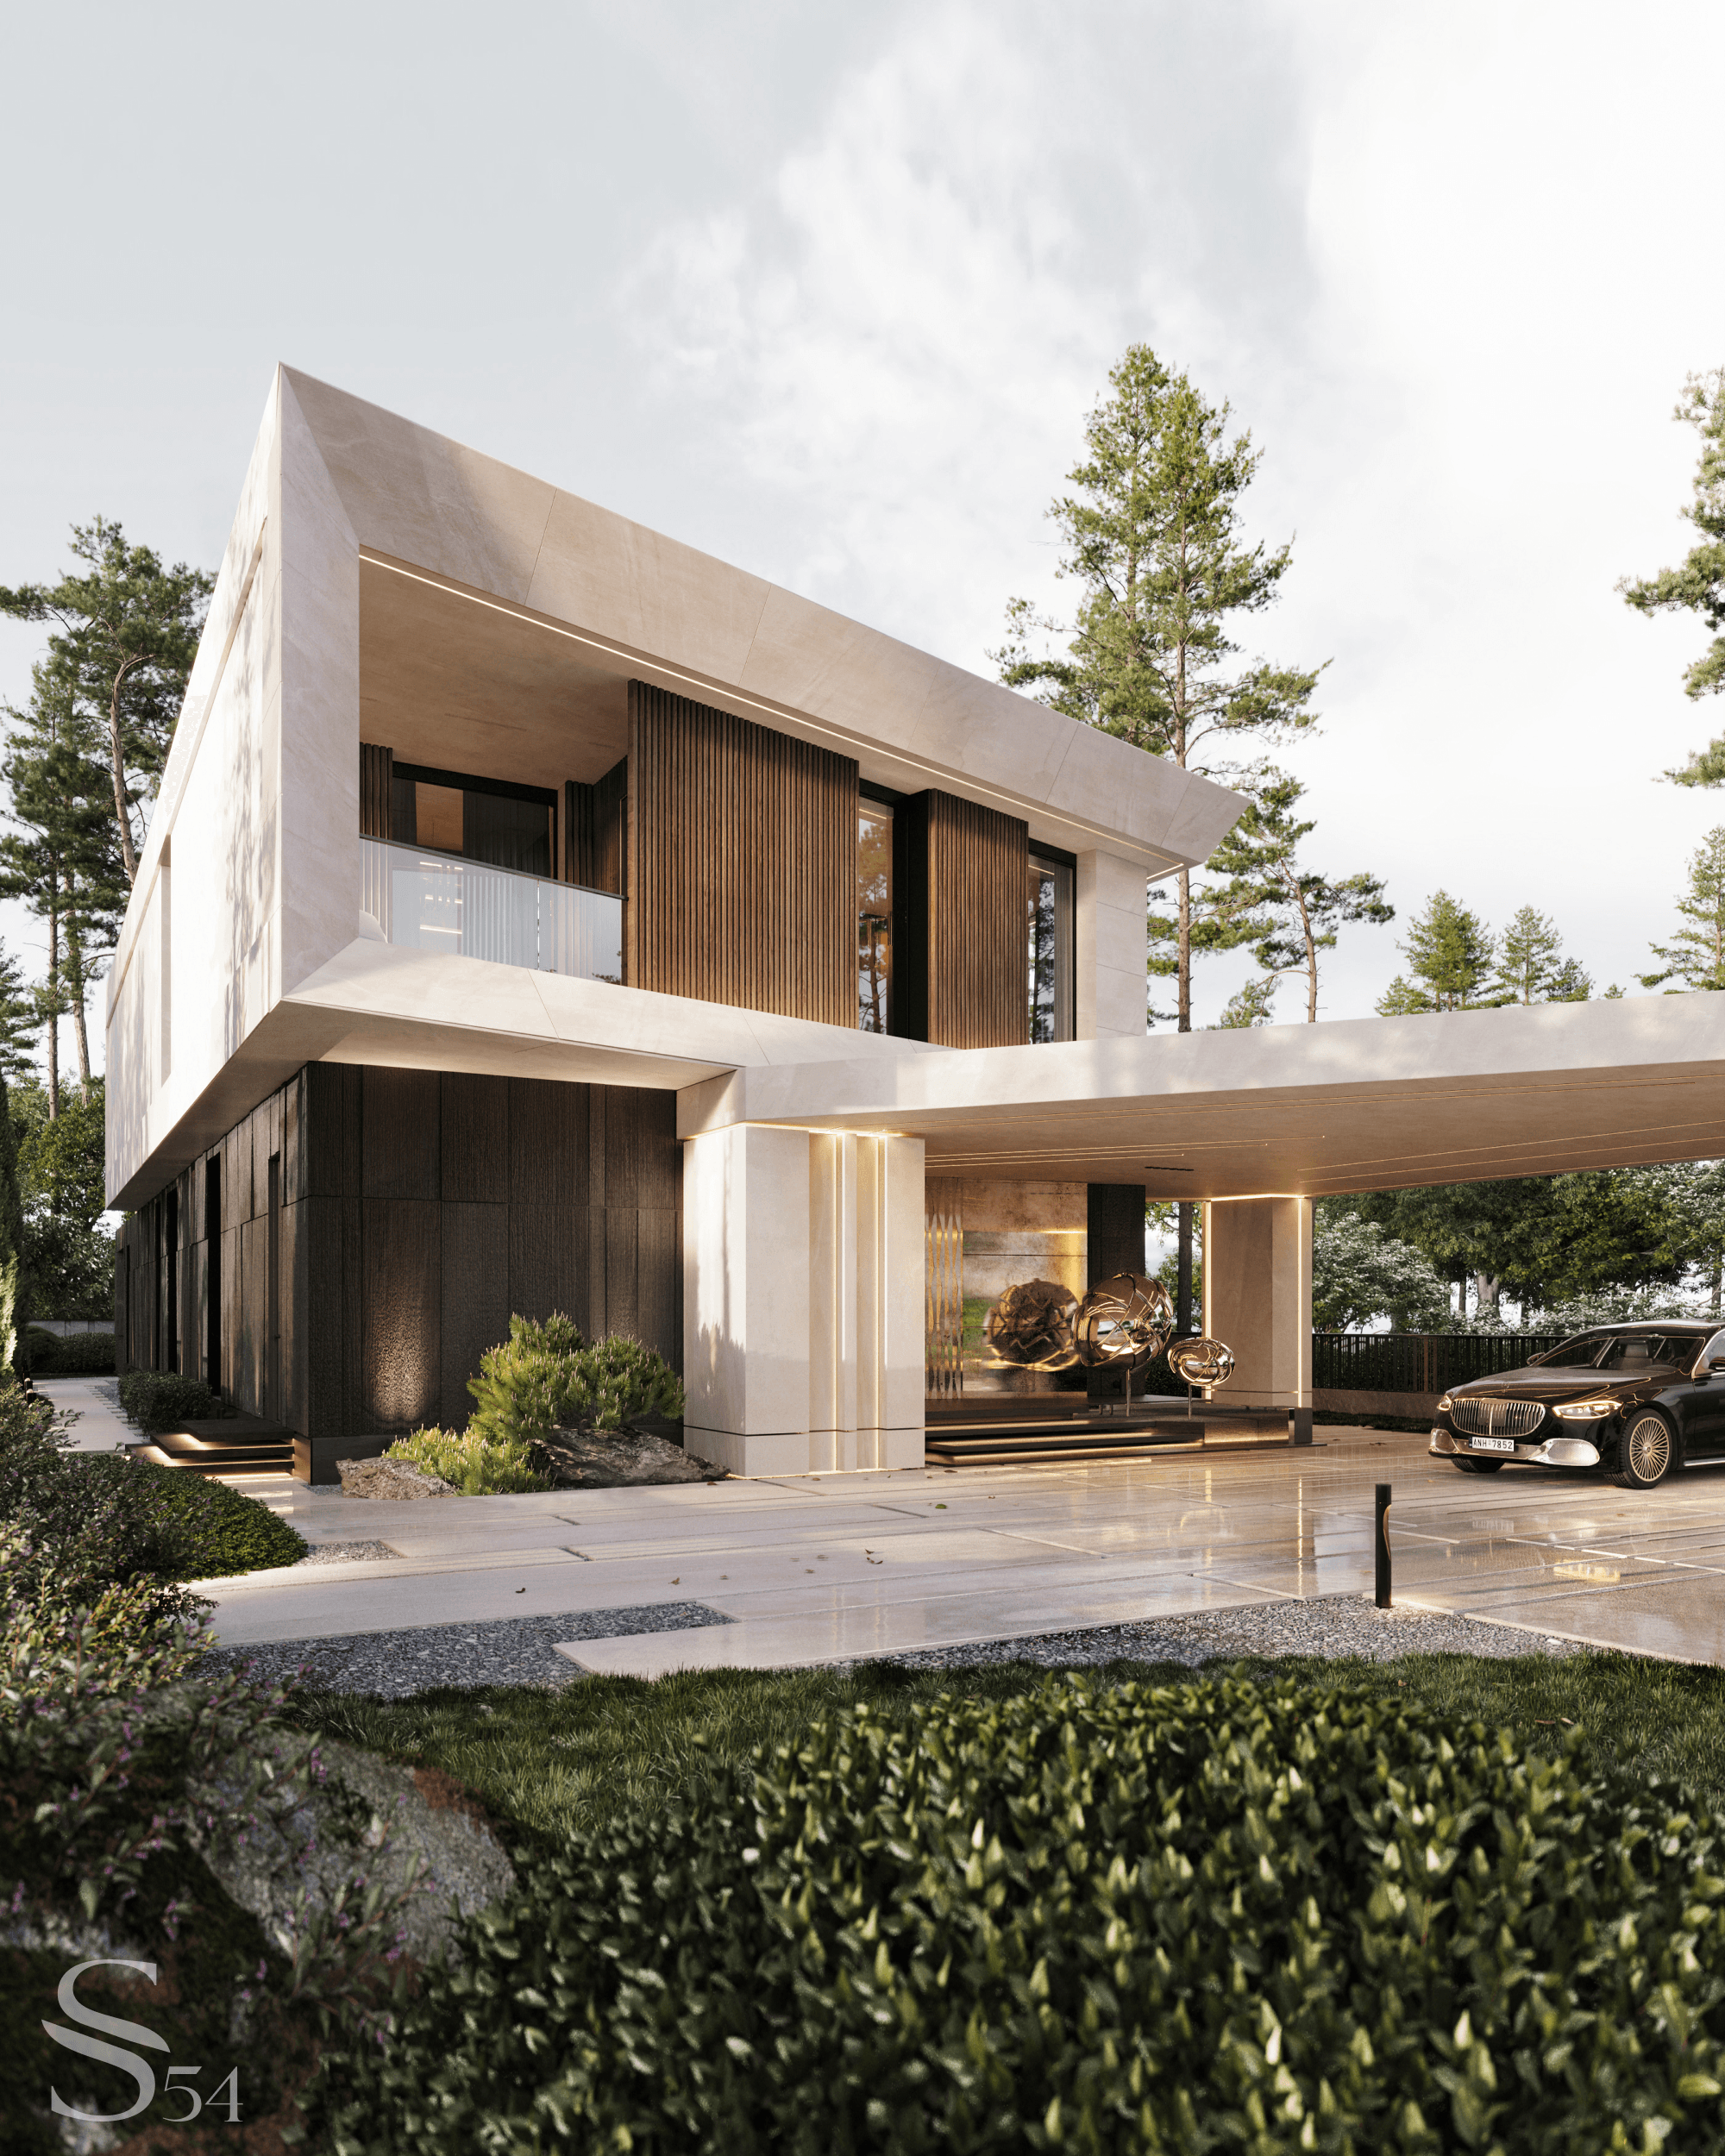 The combination of smooth white stone and rough textured black ceramic granite, along with the original form of the facade visible from all sides, makes this house bright and radiant without standing out from the overall landscape composition.